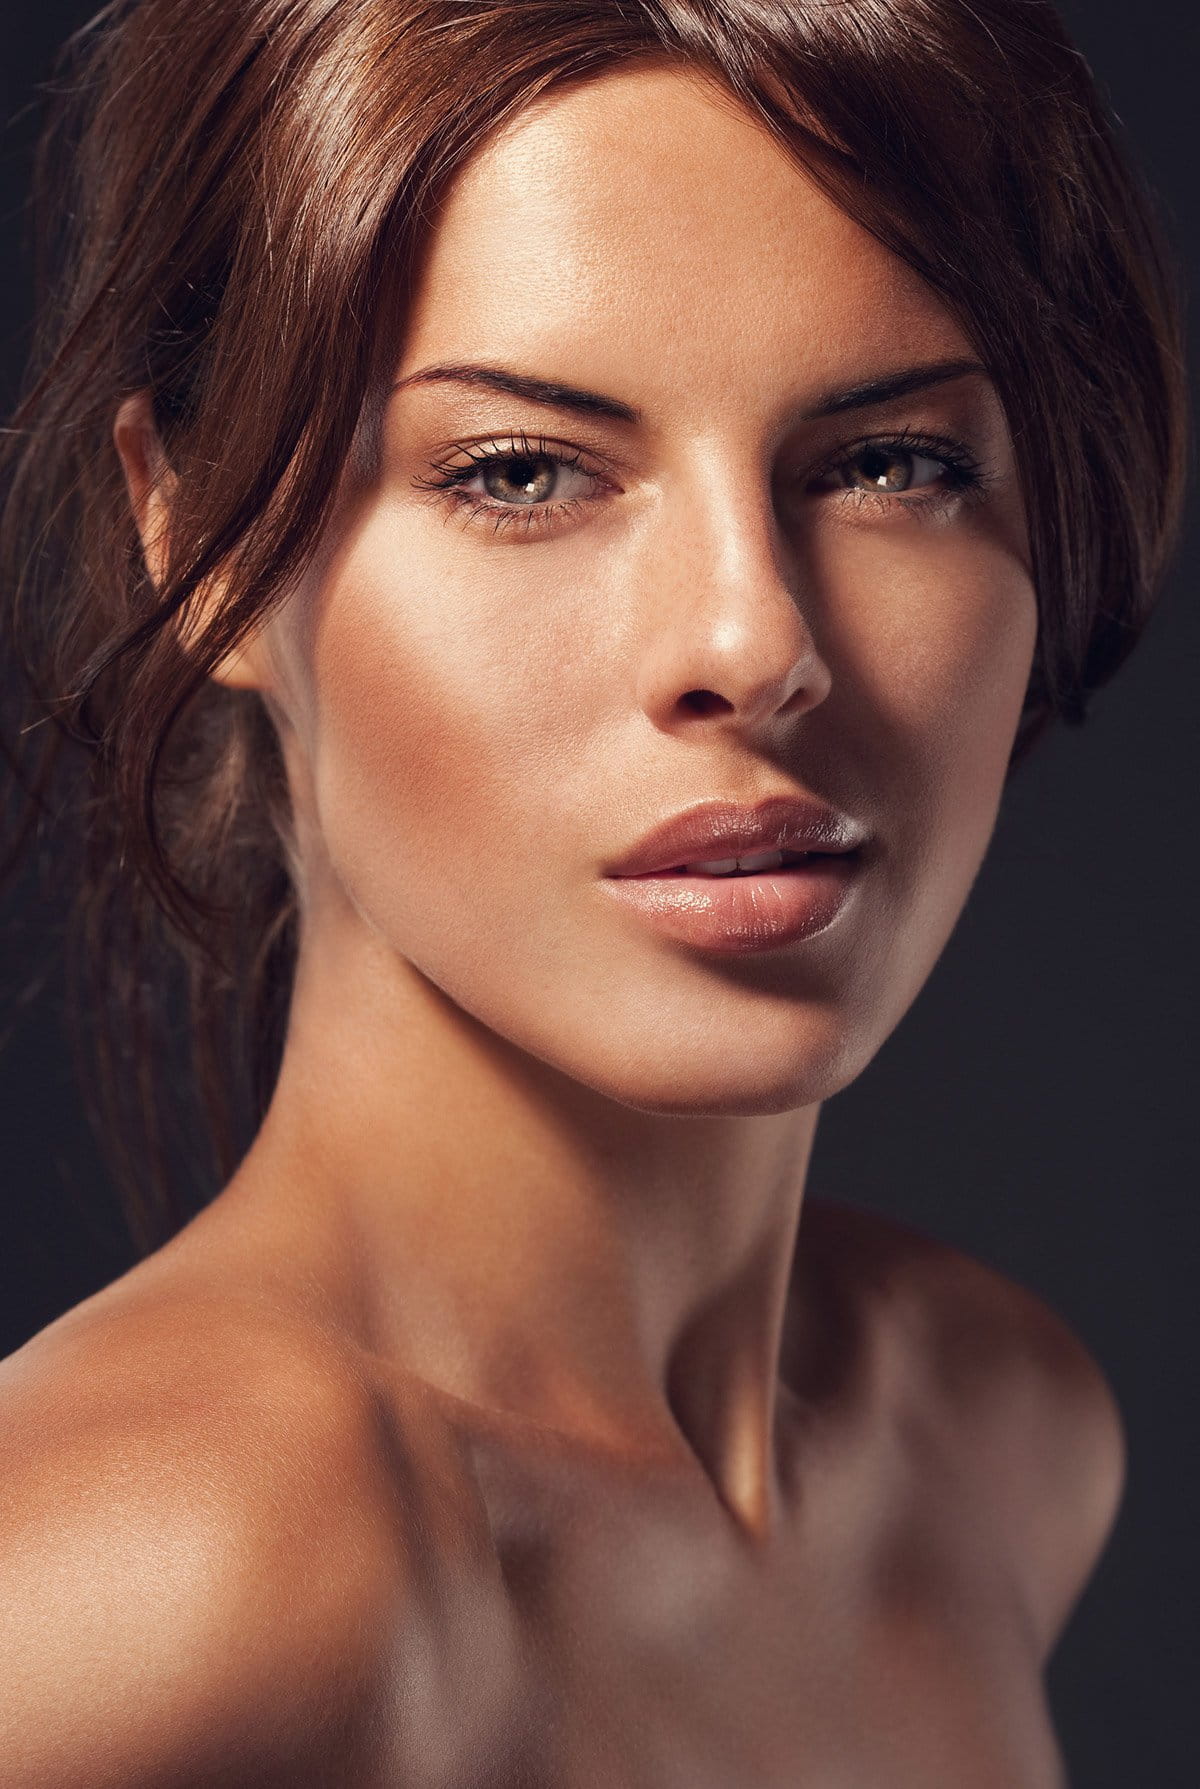 Orange County Plastic Surgery model with brown hair